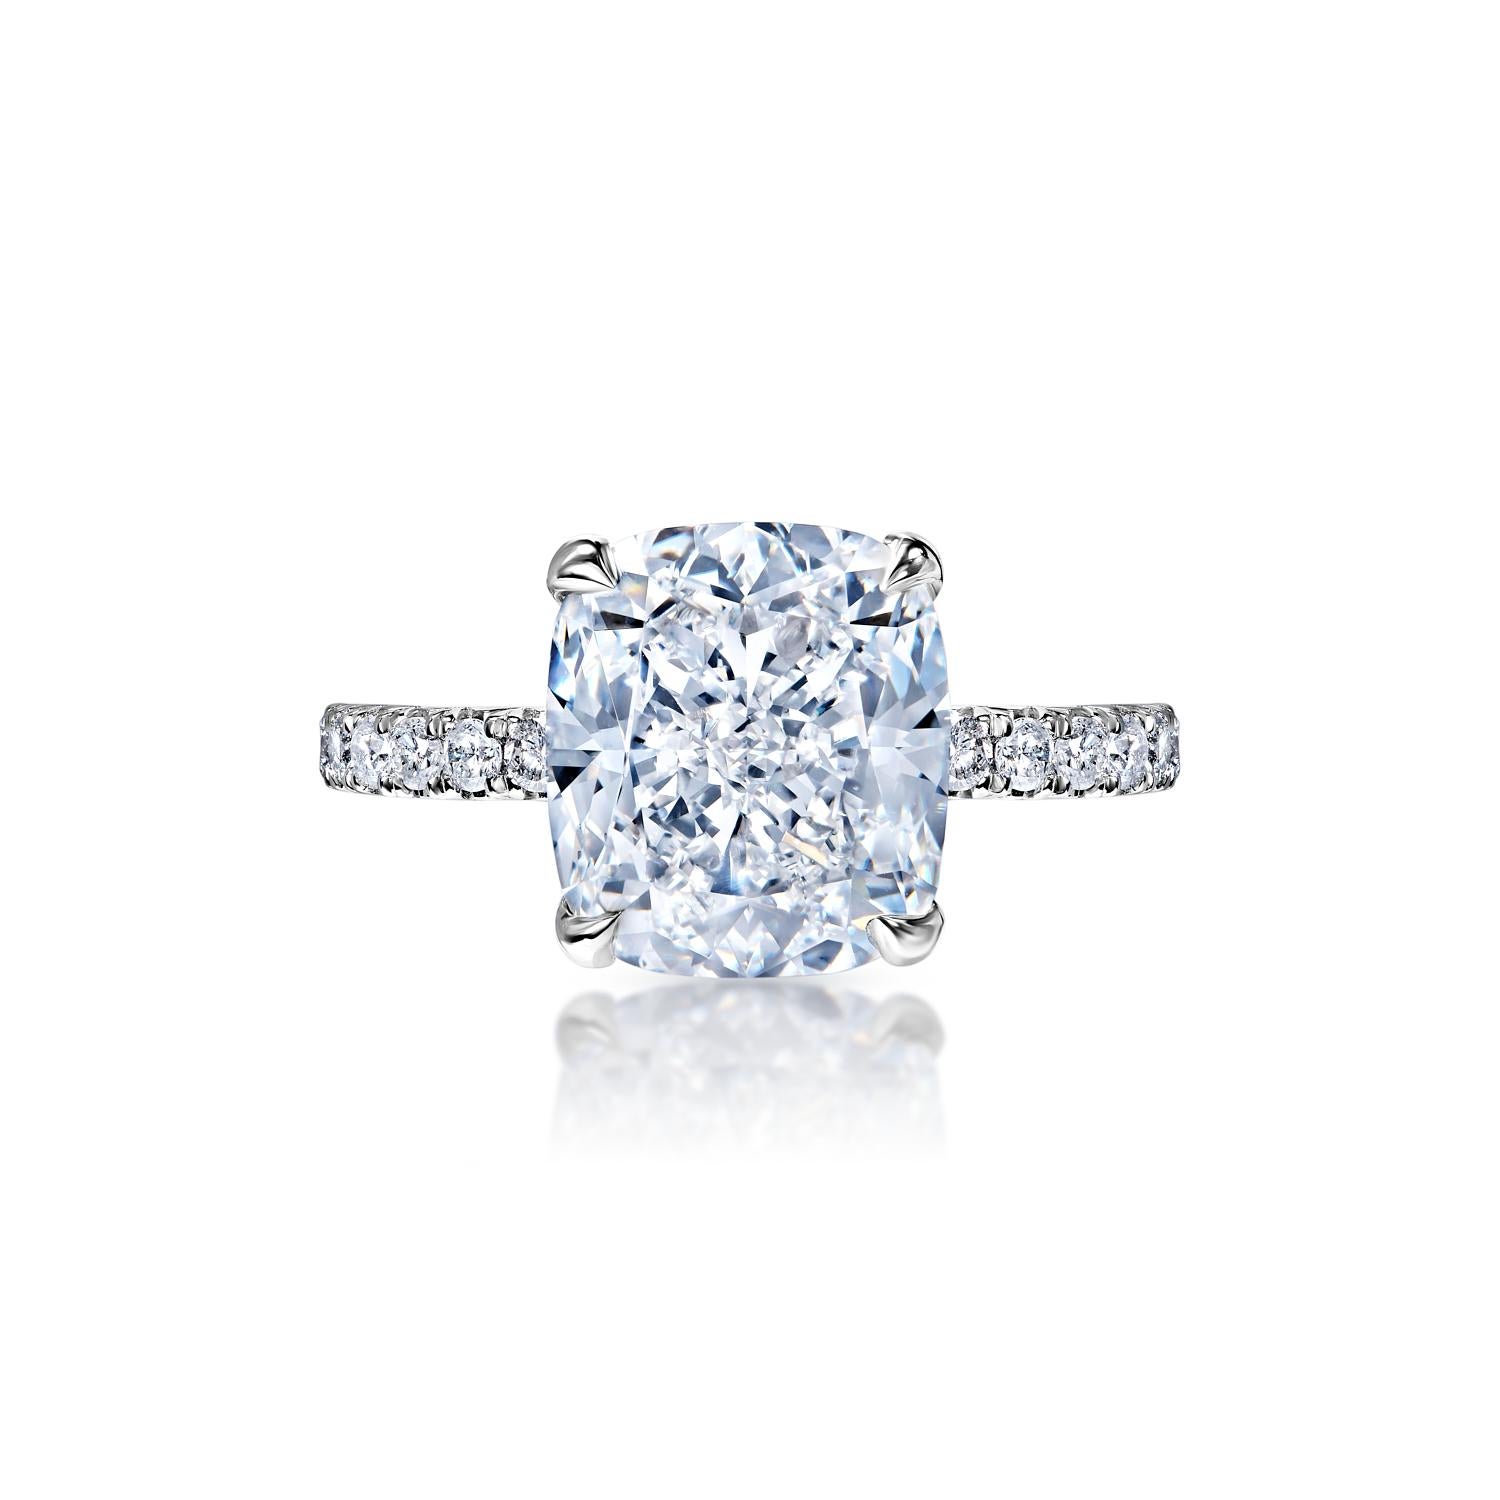 Dayana 6 Carat D VVS1 Cushion Cut Diamond Engagement Ring in Platinum by Mike Nekta


GIA CERTIFIED
Center Diamond:

Carat Weight: 5.69 Carats
Color : D*
Clarity: VVS1
Style: Cushion Cut
*This Diamond has been treated by one or more processes to